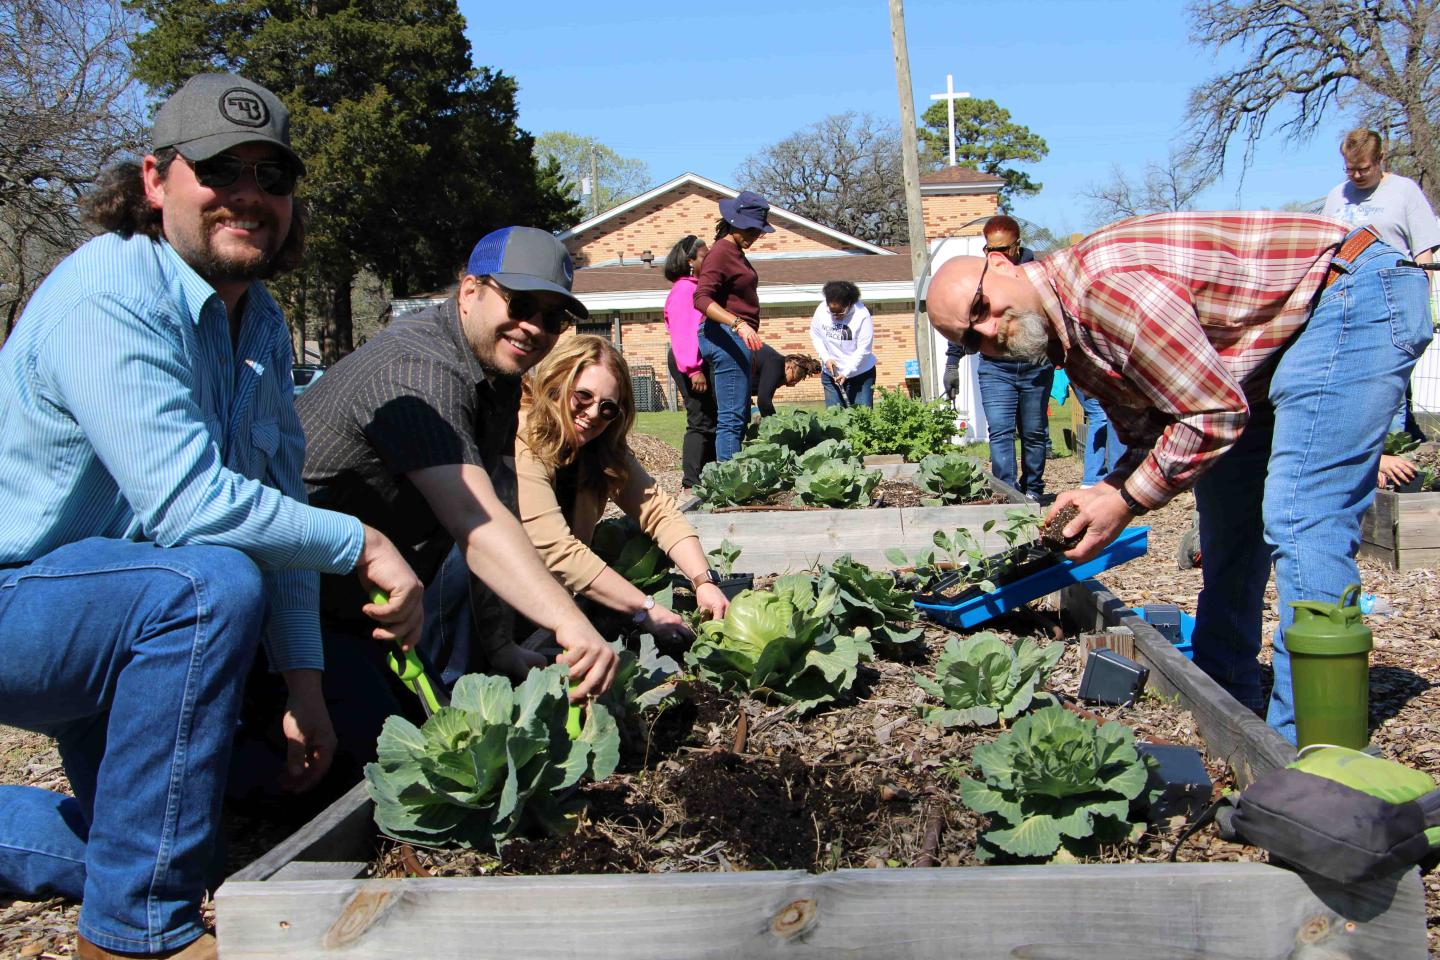 Group of people outside bending over to look at plants in a raised flower bed 